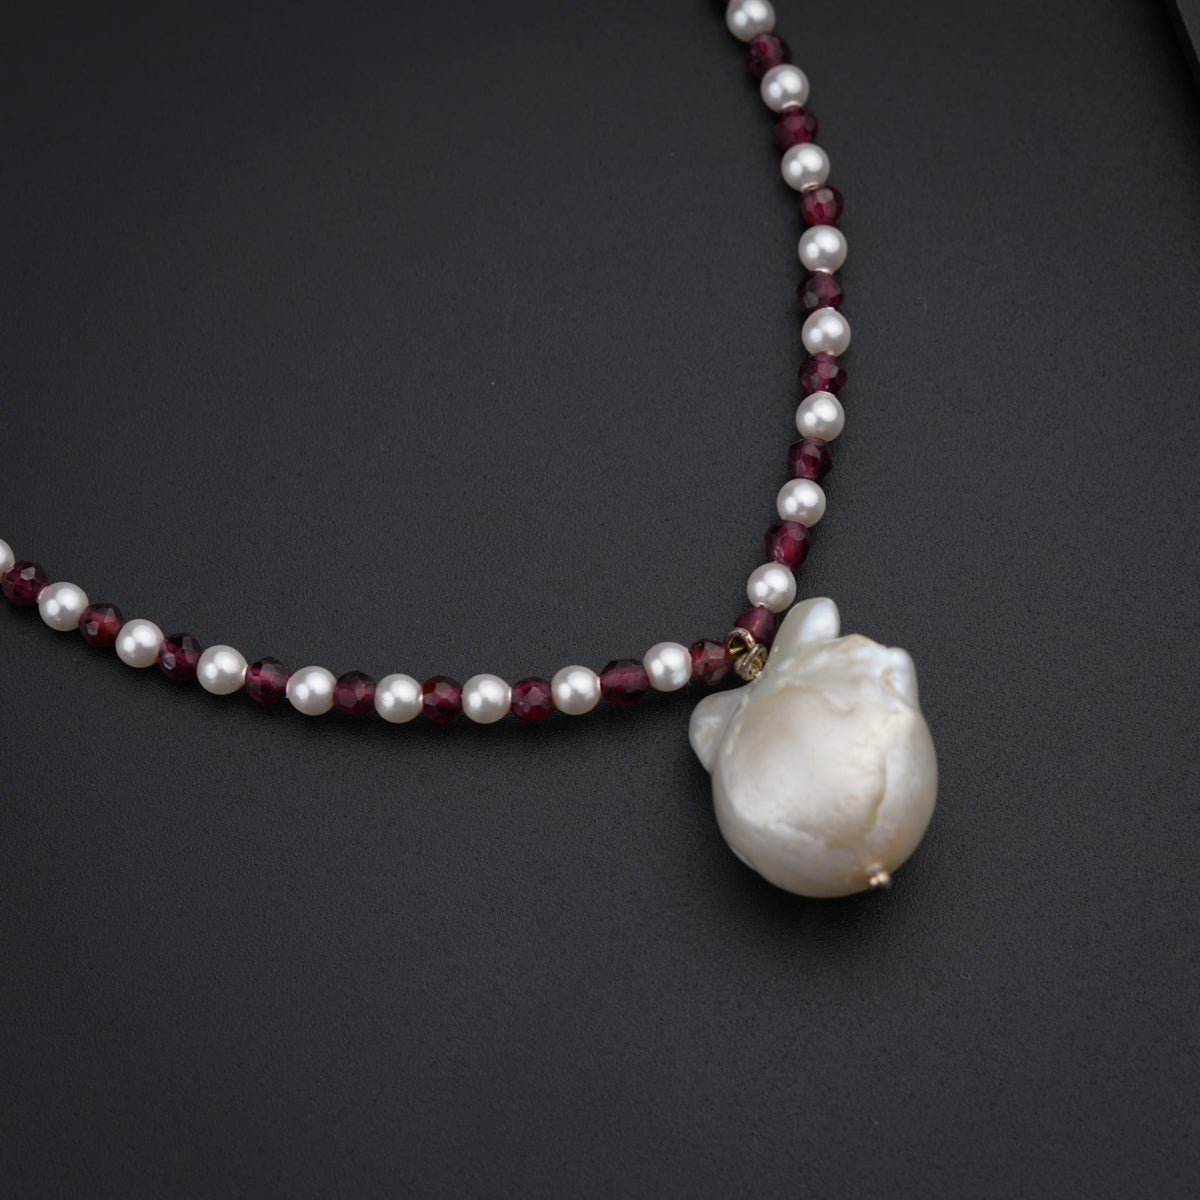 a necklace with a white flower and pearls